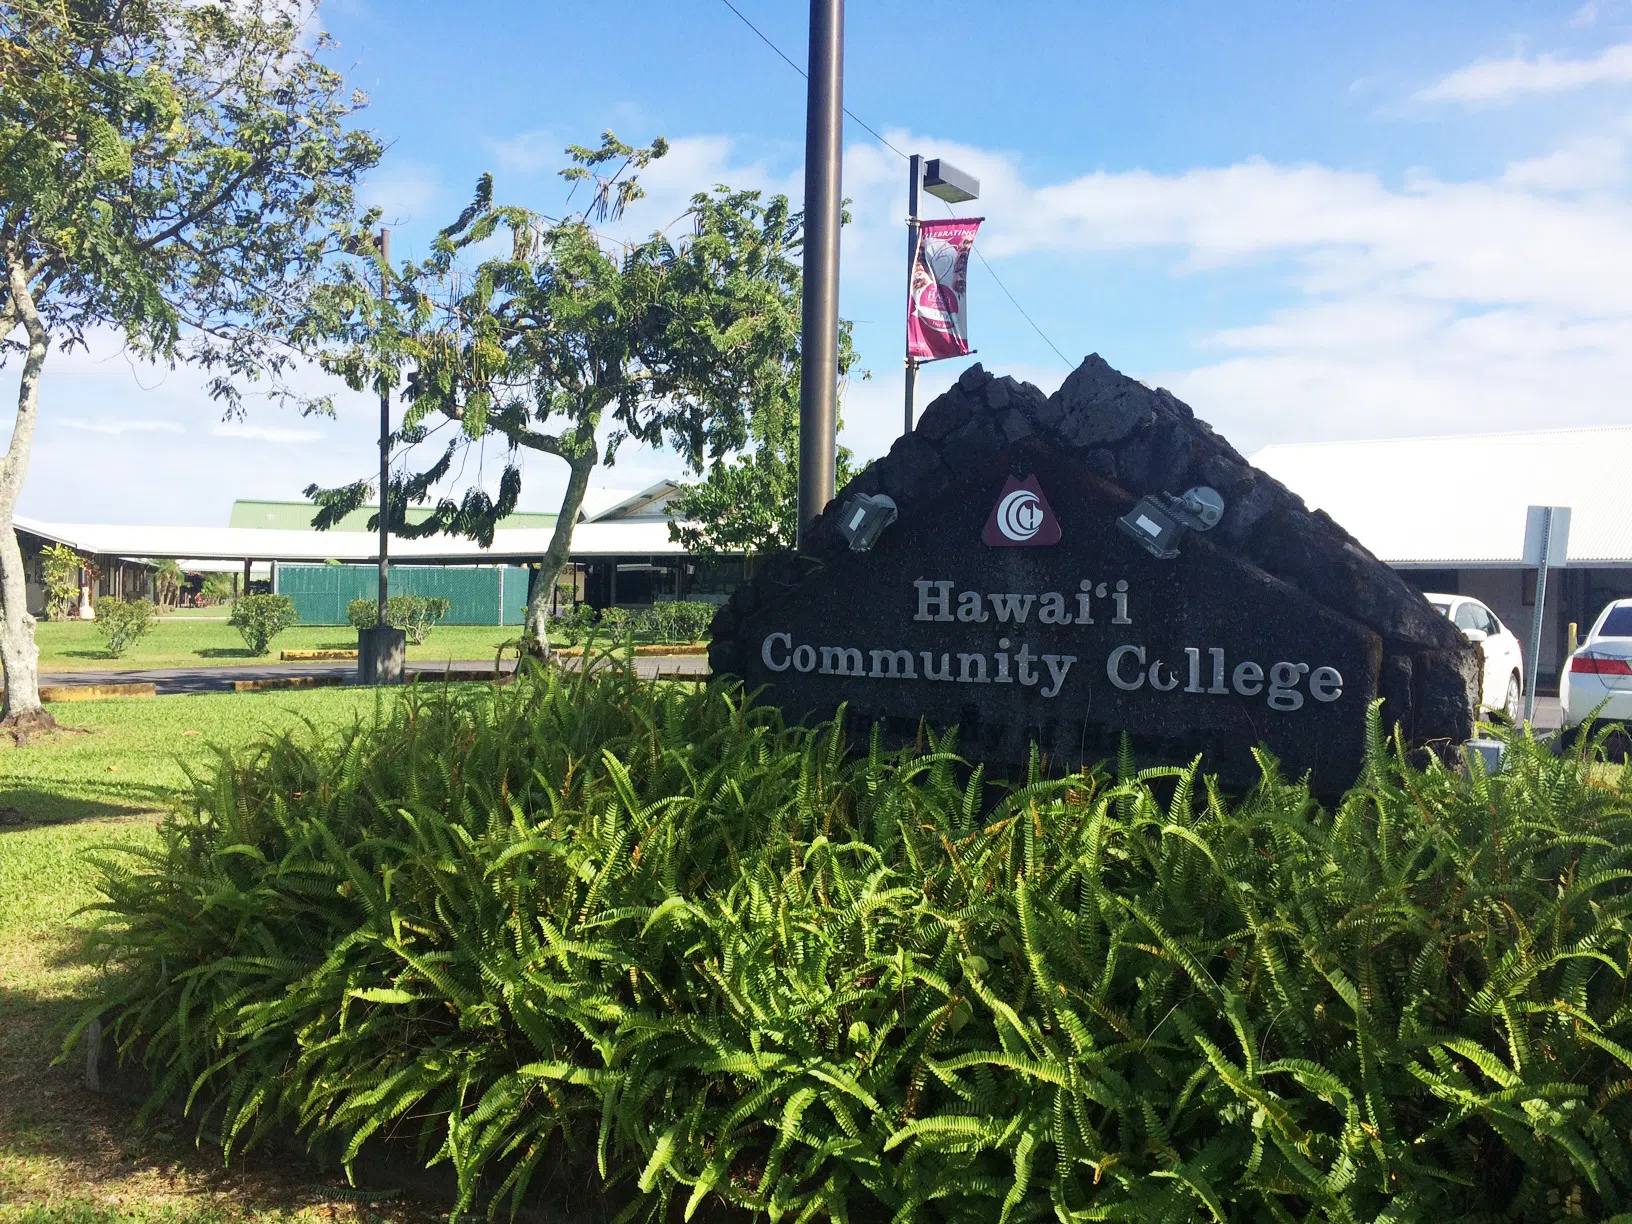 Welcome to the Hawai'i Community College Campus. We are located at 1175 Manono Street Hilo, HI 96720. Upon entering our campus, you will see the Paepae Haumāna - Welcome Center.